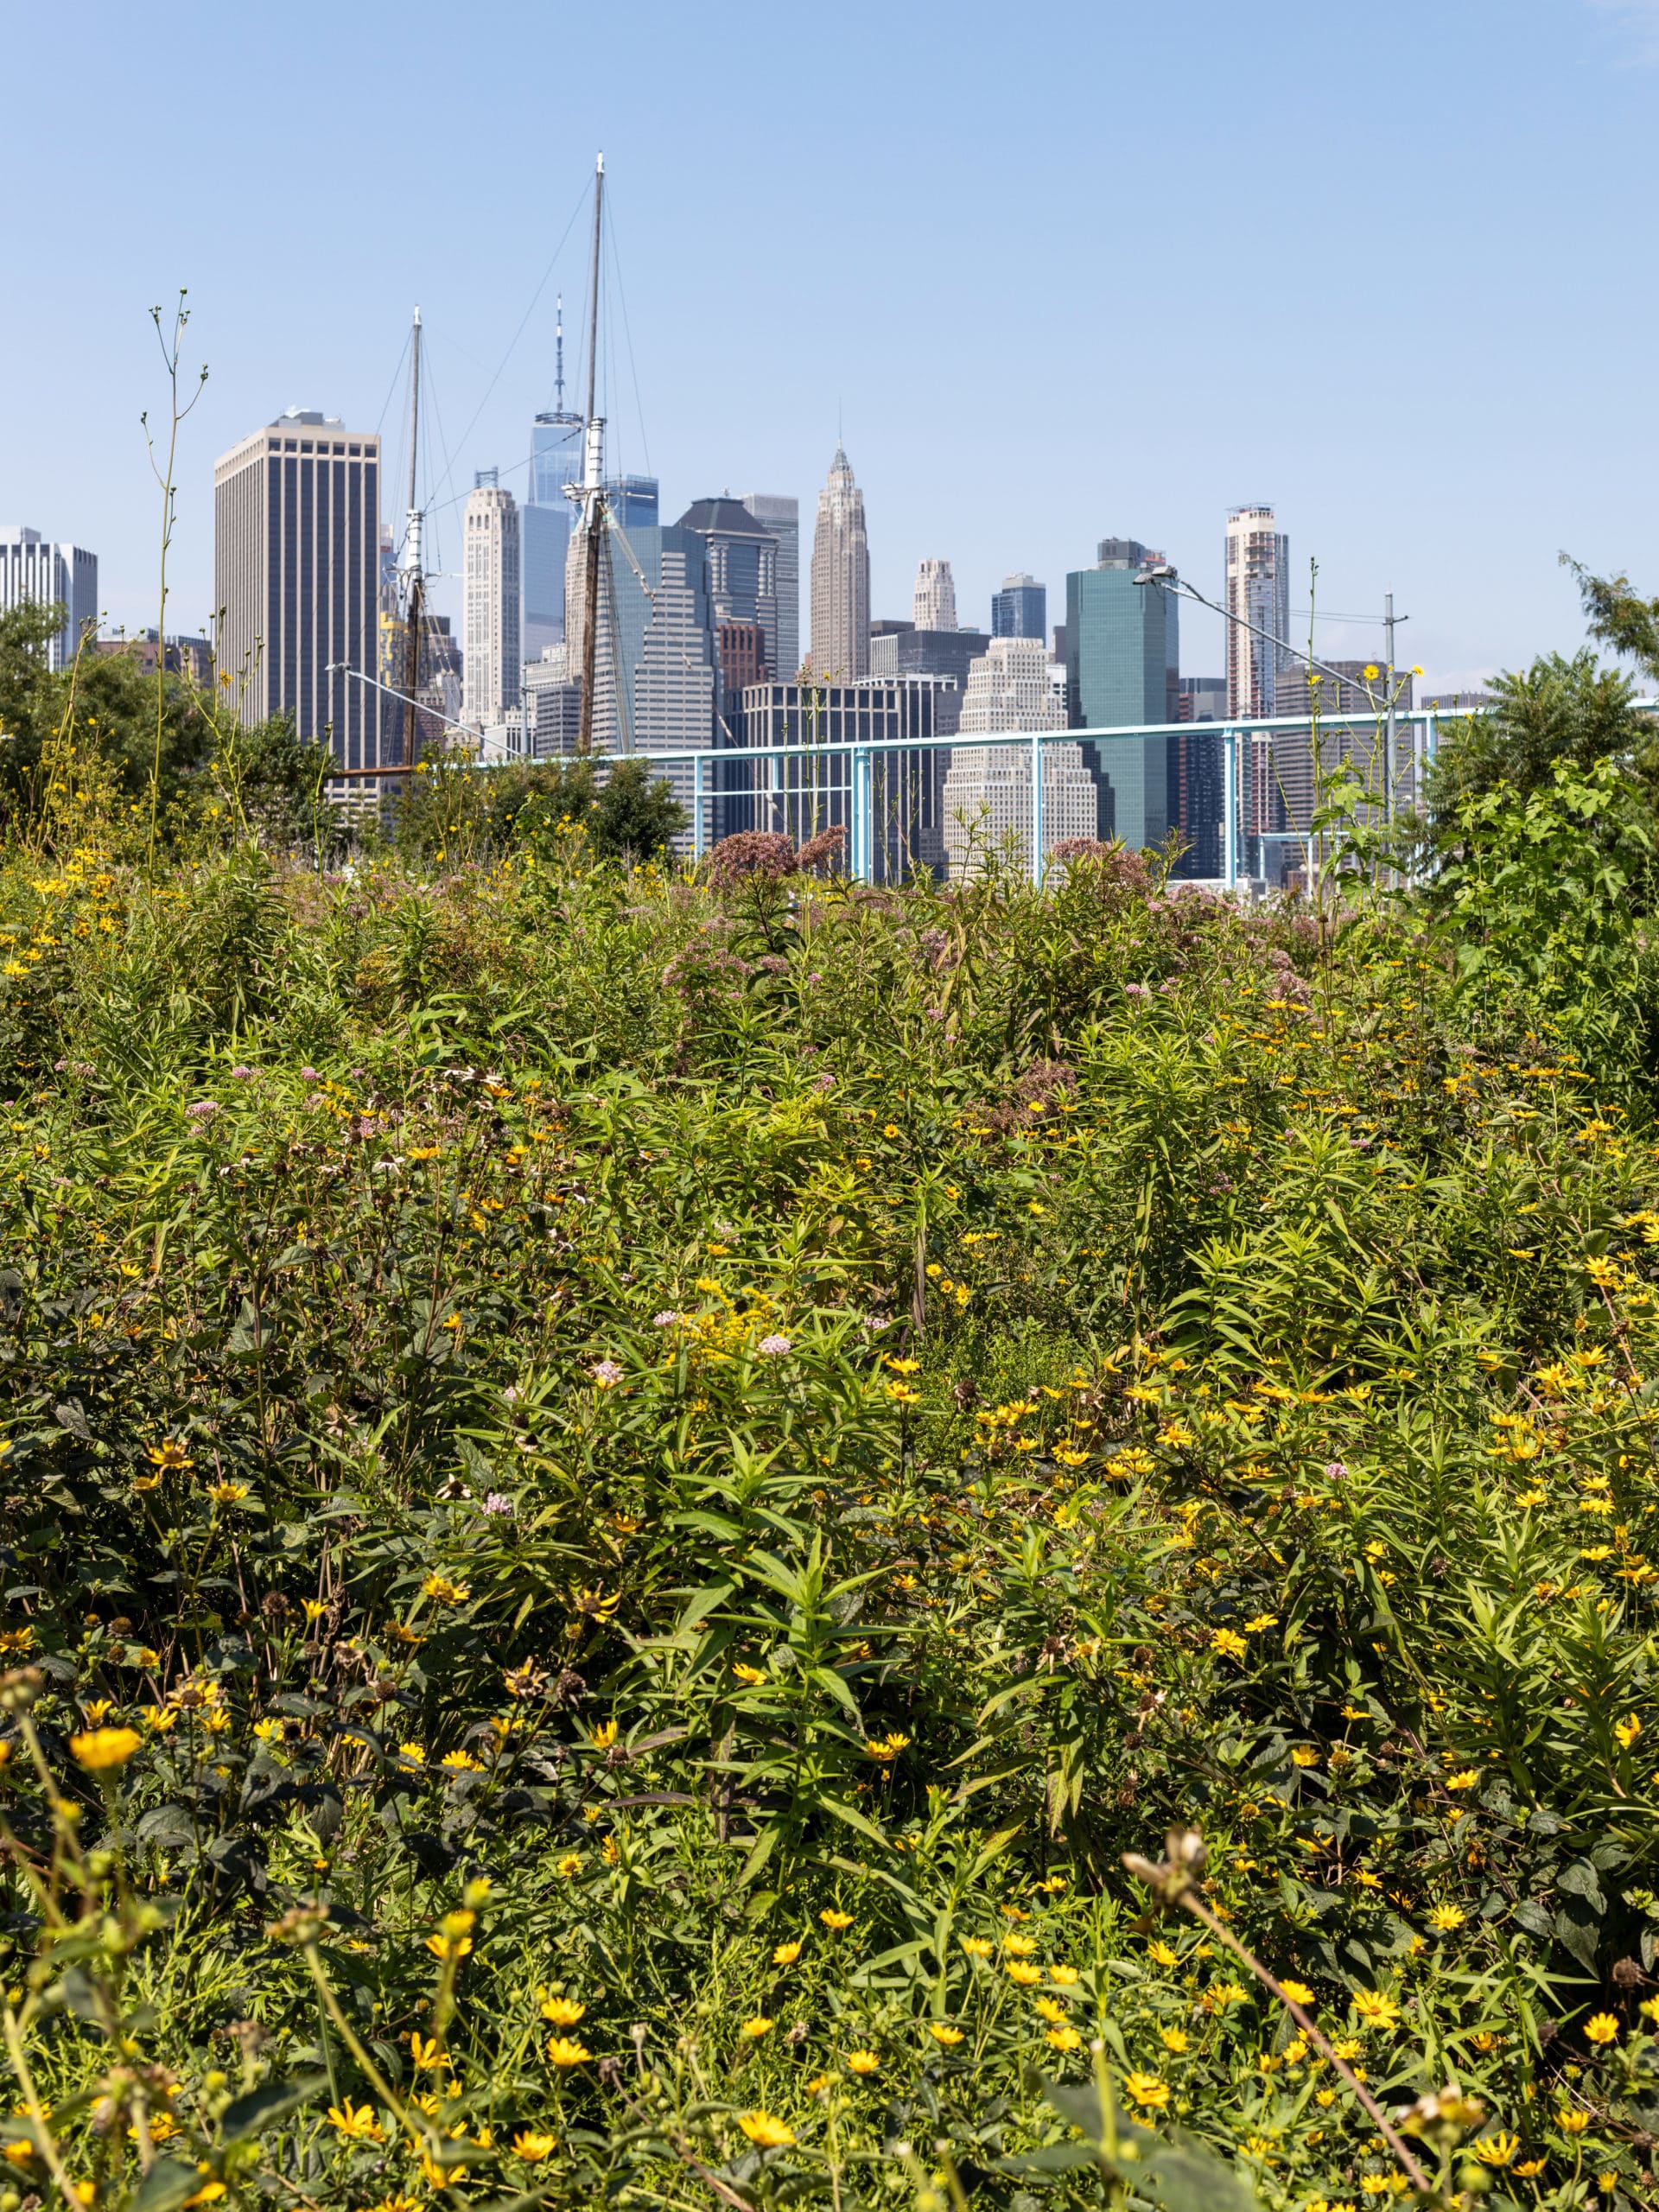 Yellow flowers and bushes on a sunny day with lower Manhattan in the background.